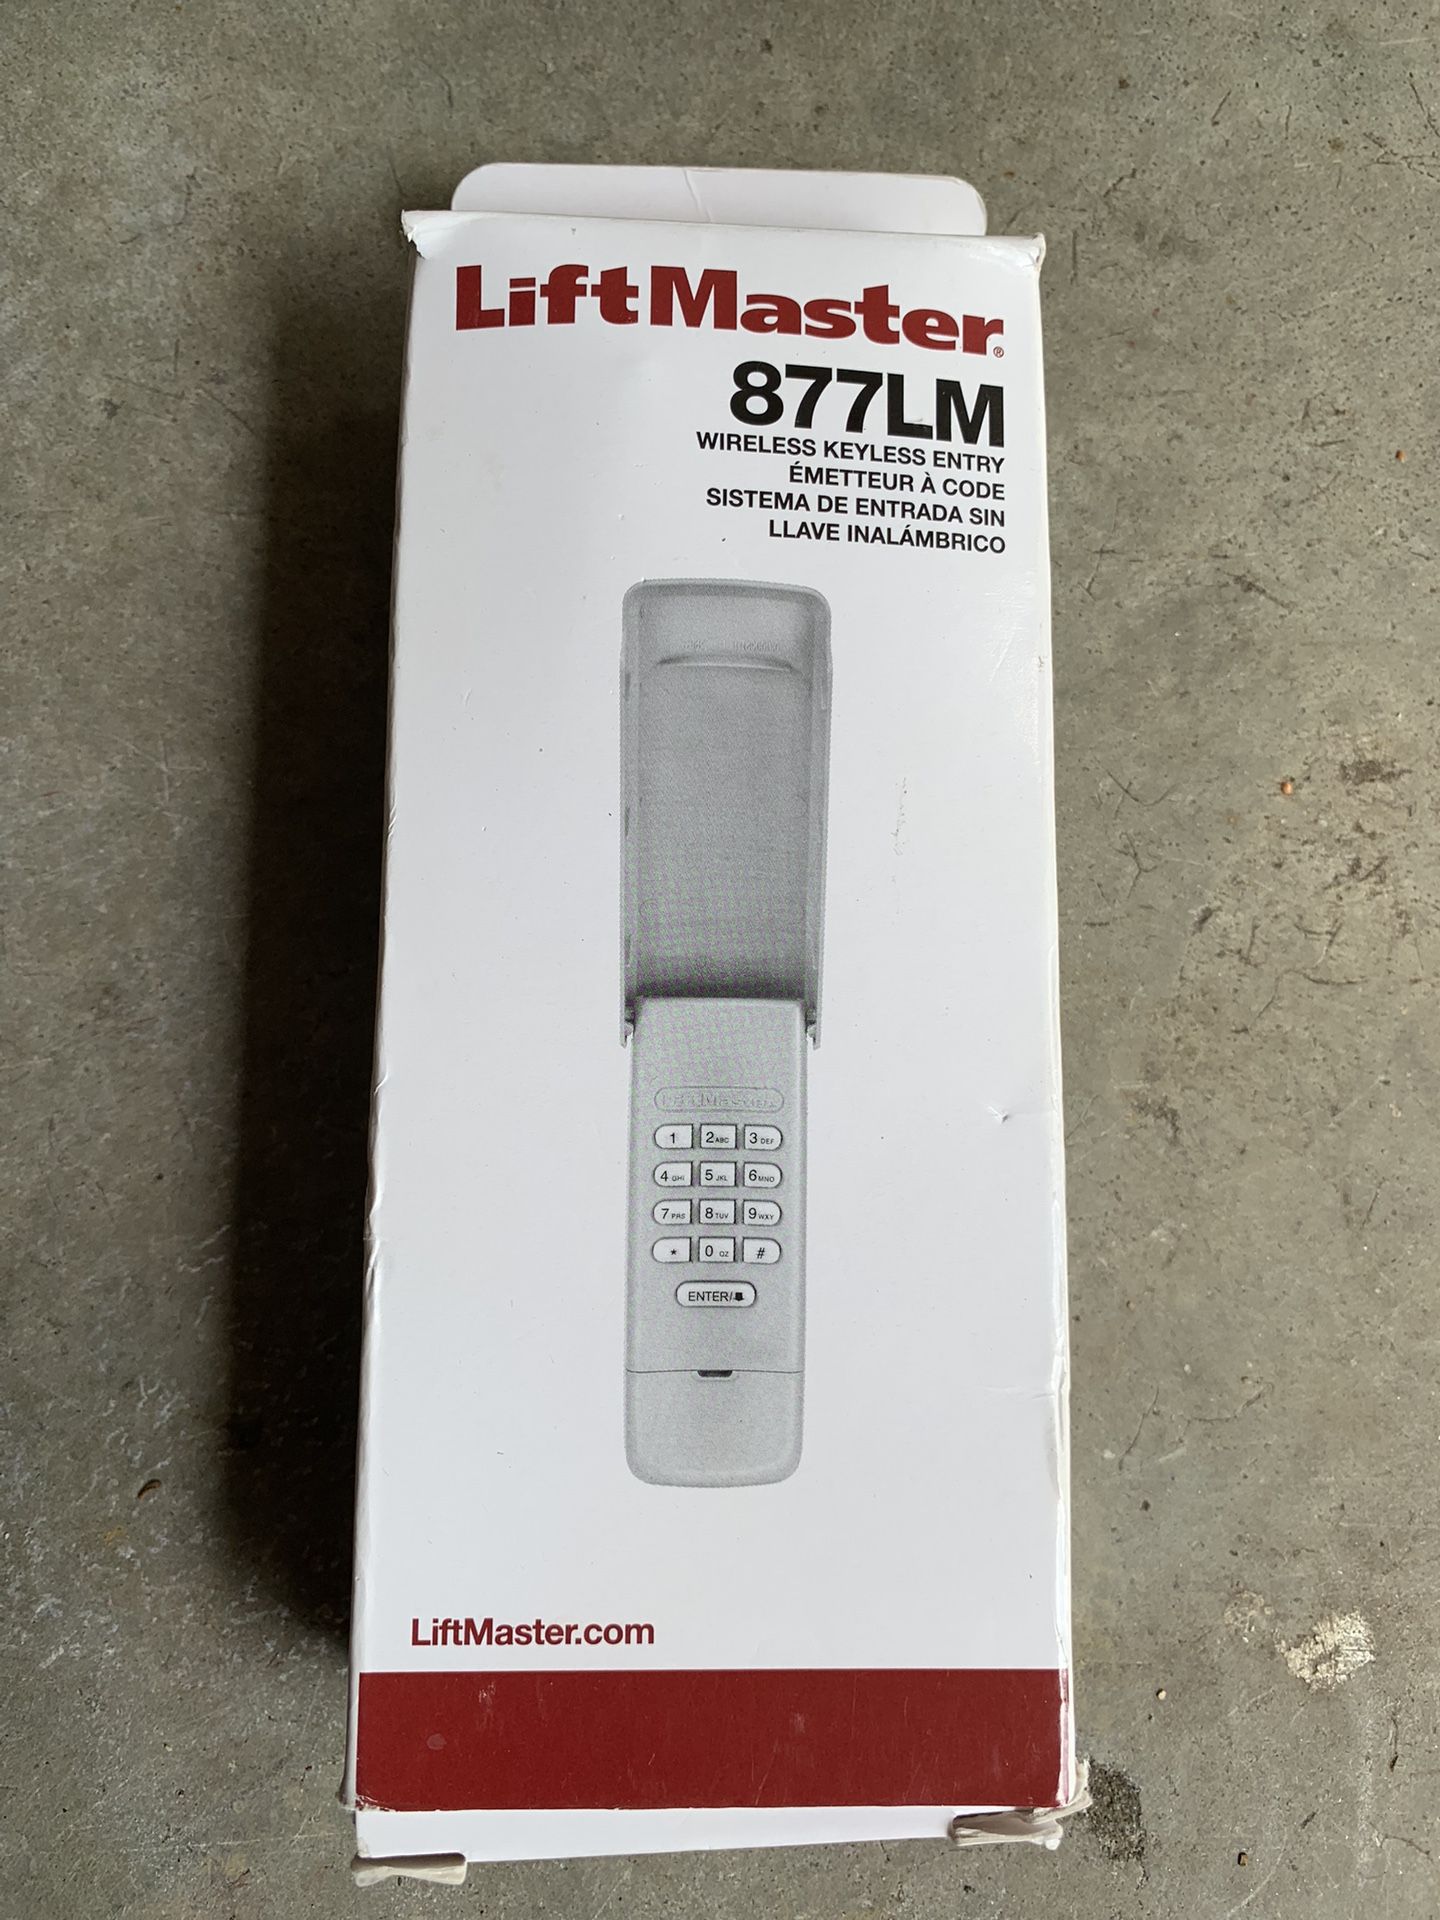 LiftMaster 877LM Wireless and Keyless Entry Keypad for Garage Door Openers and Gate Opener